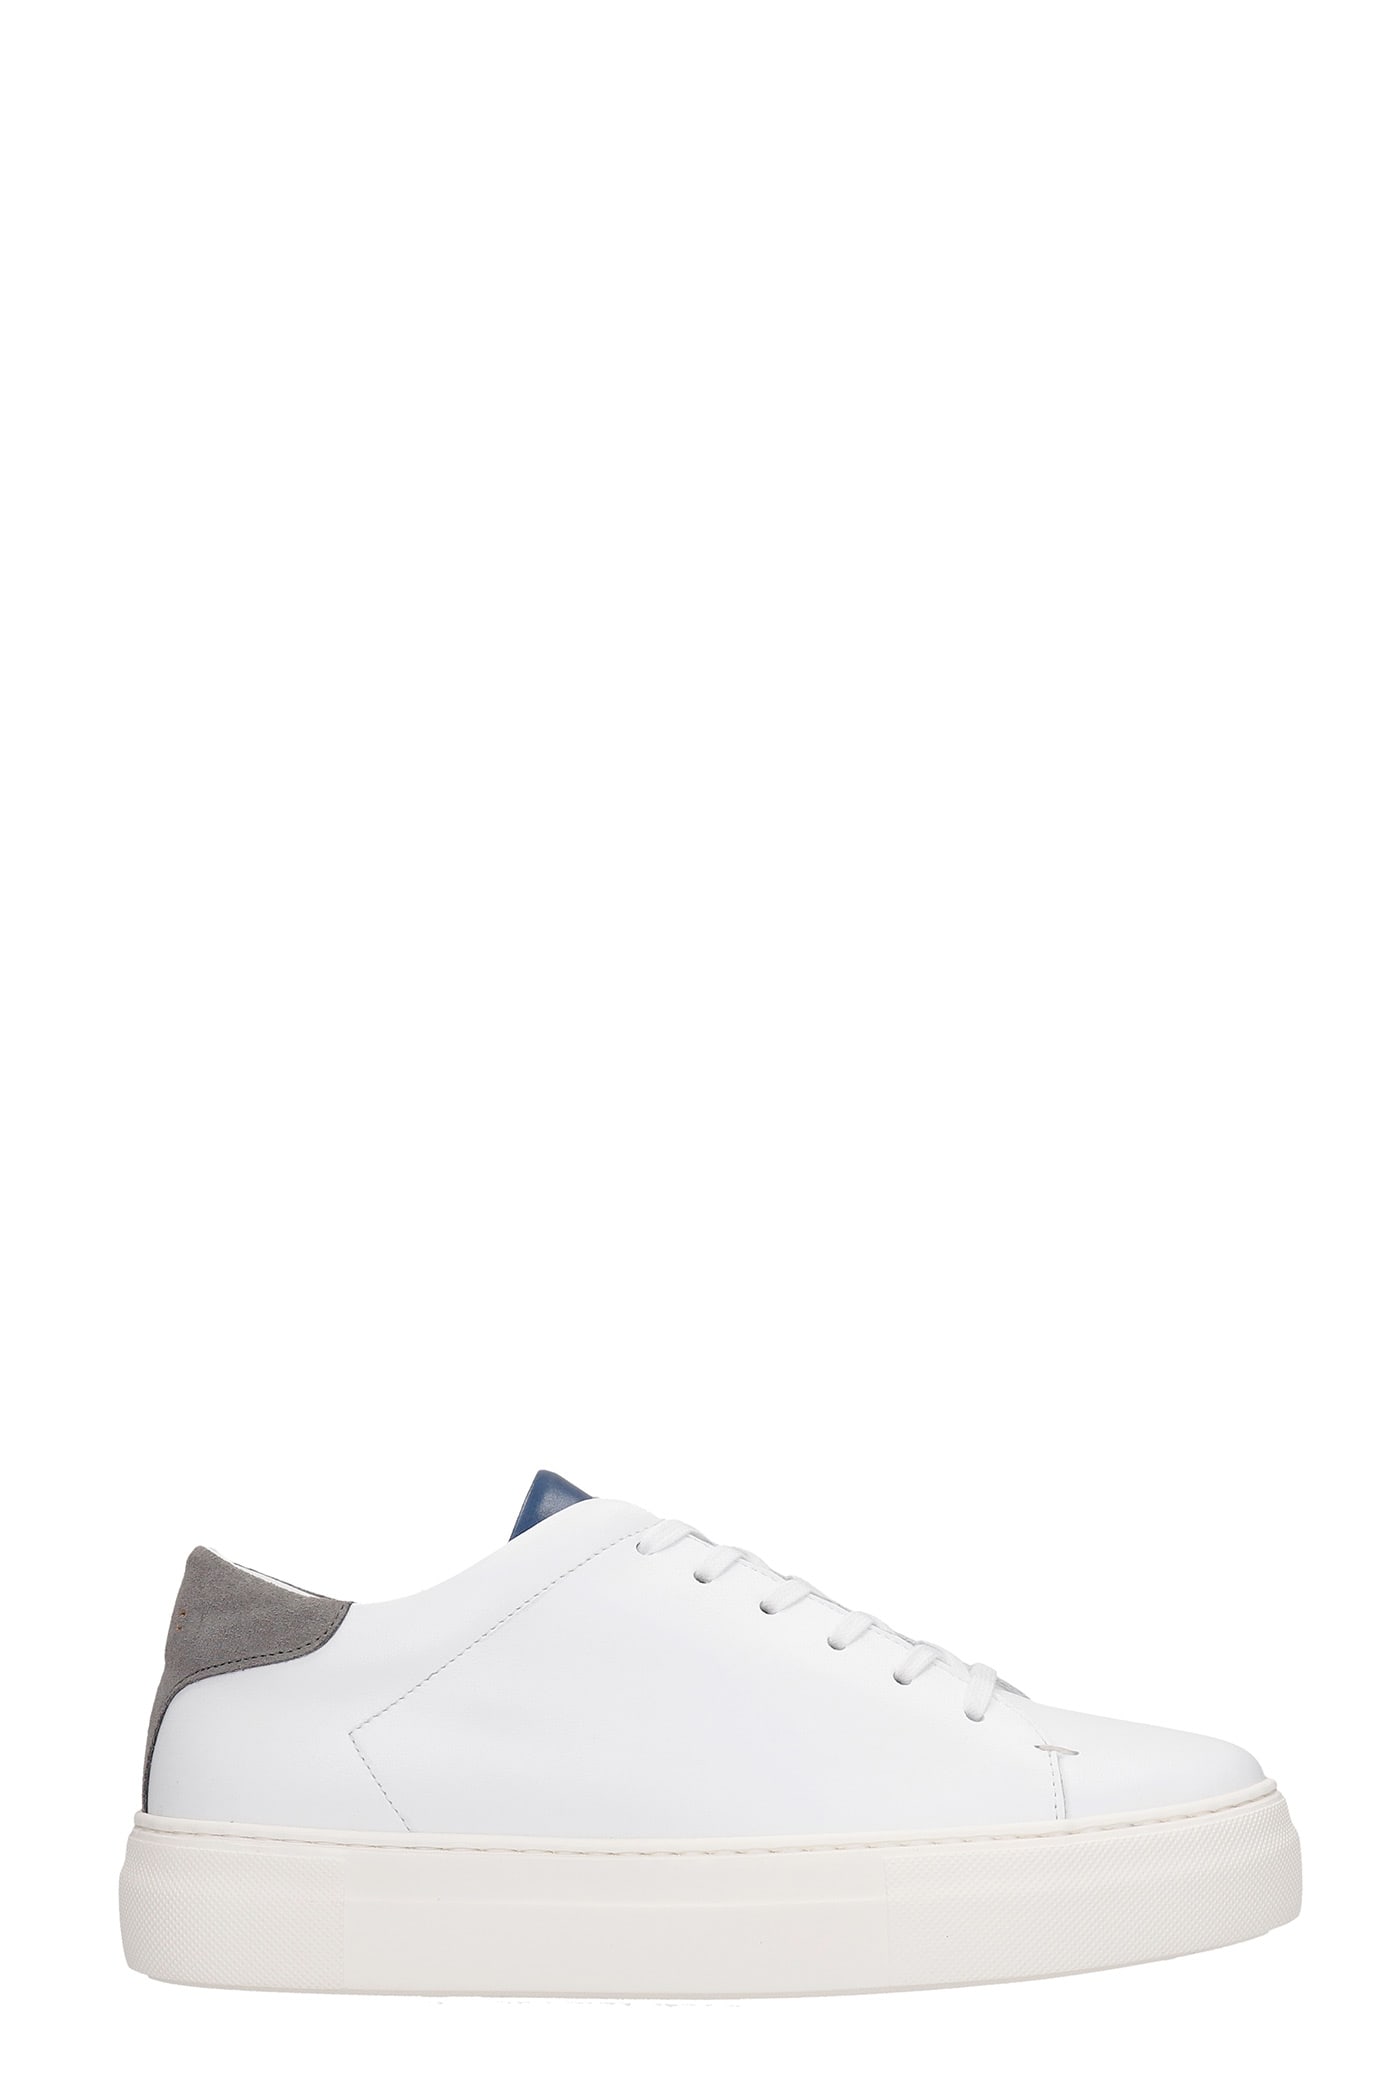 Low Brand Boat Sneakers In White Leather